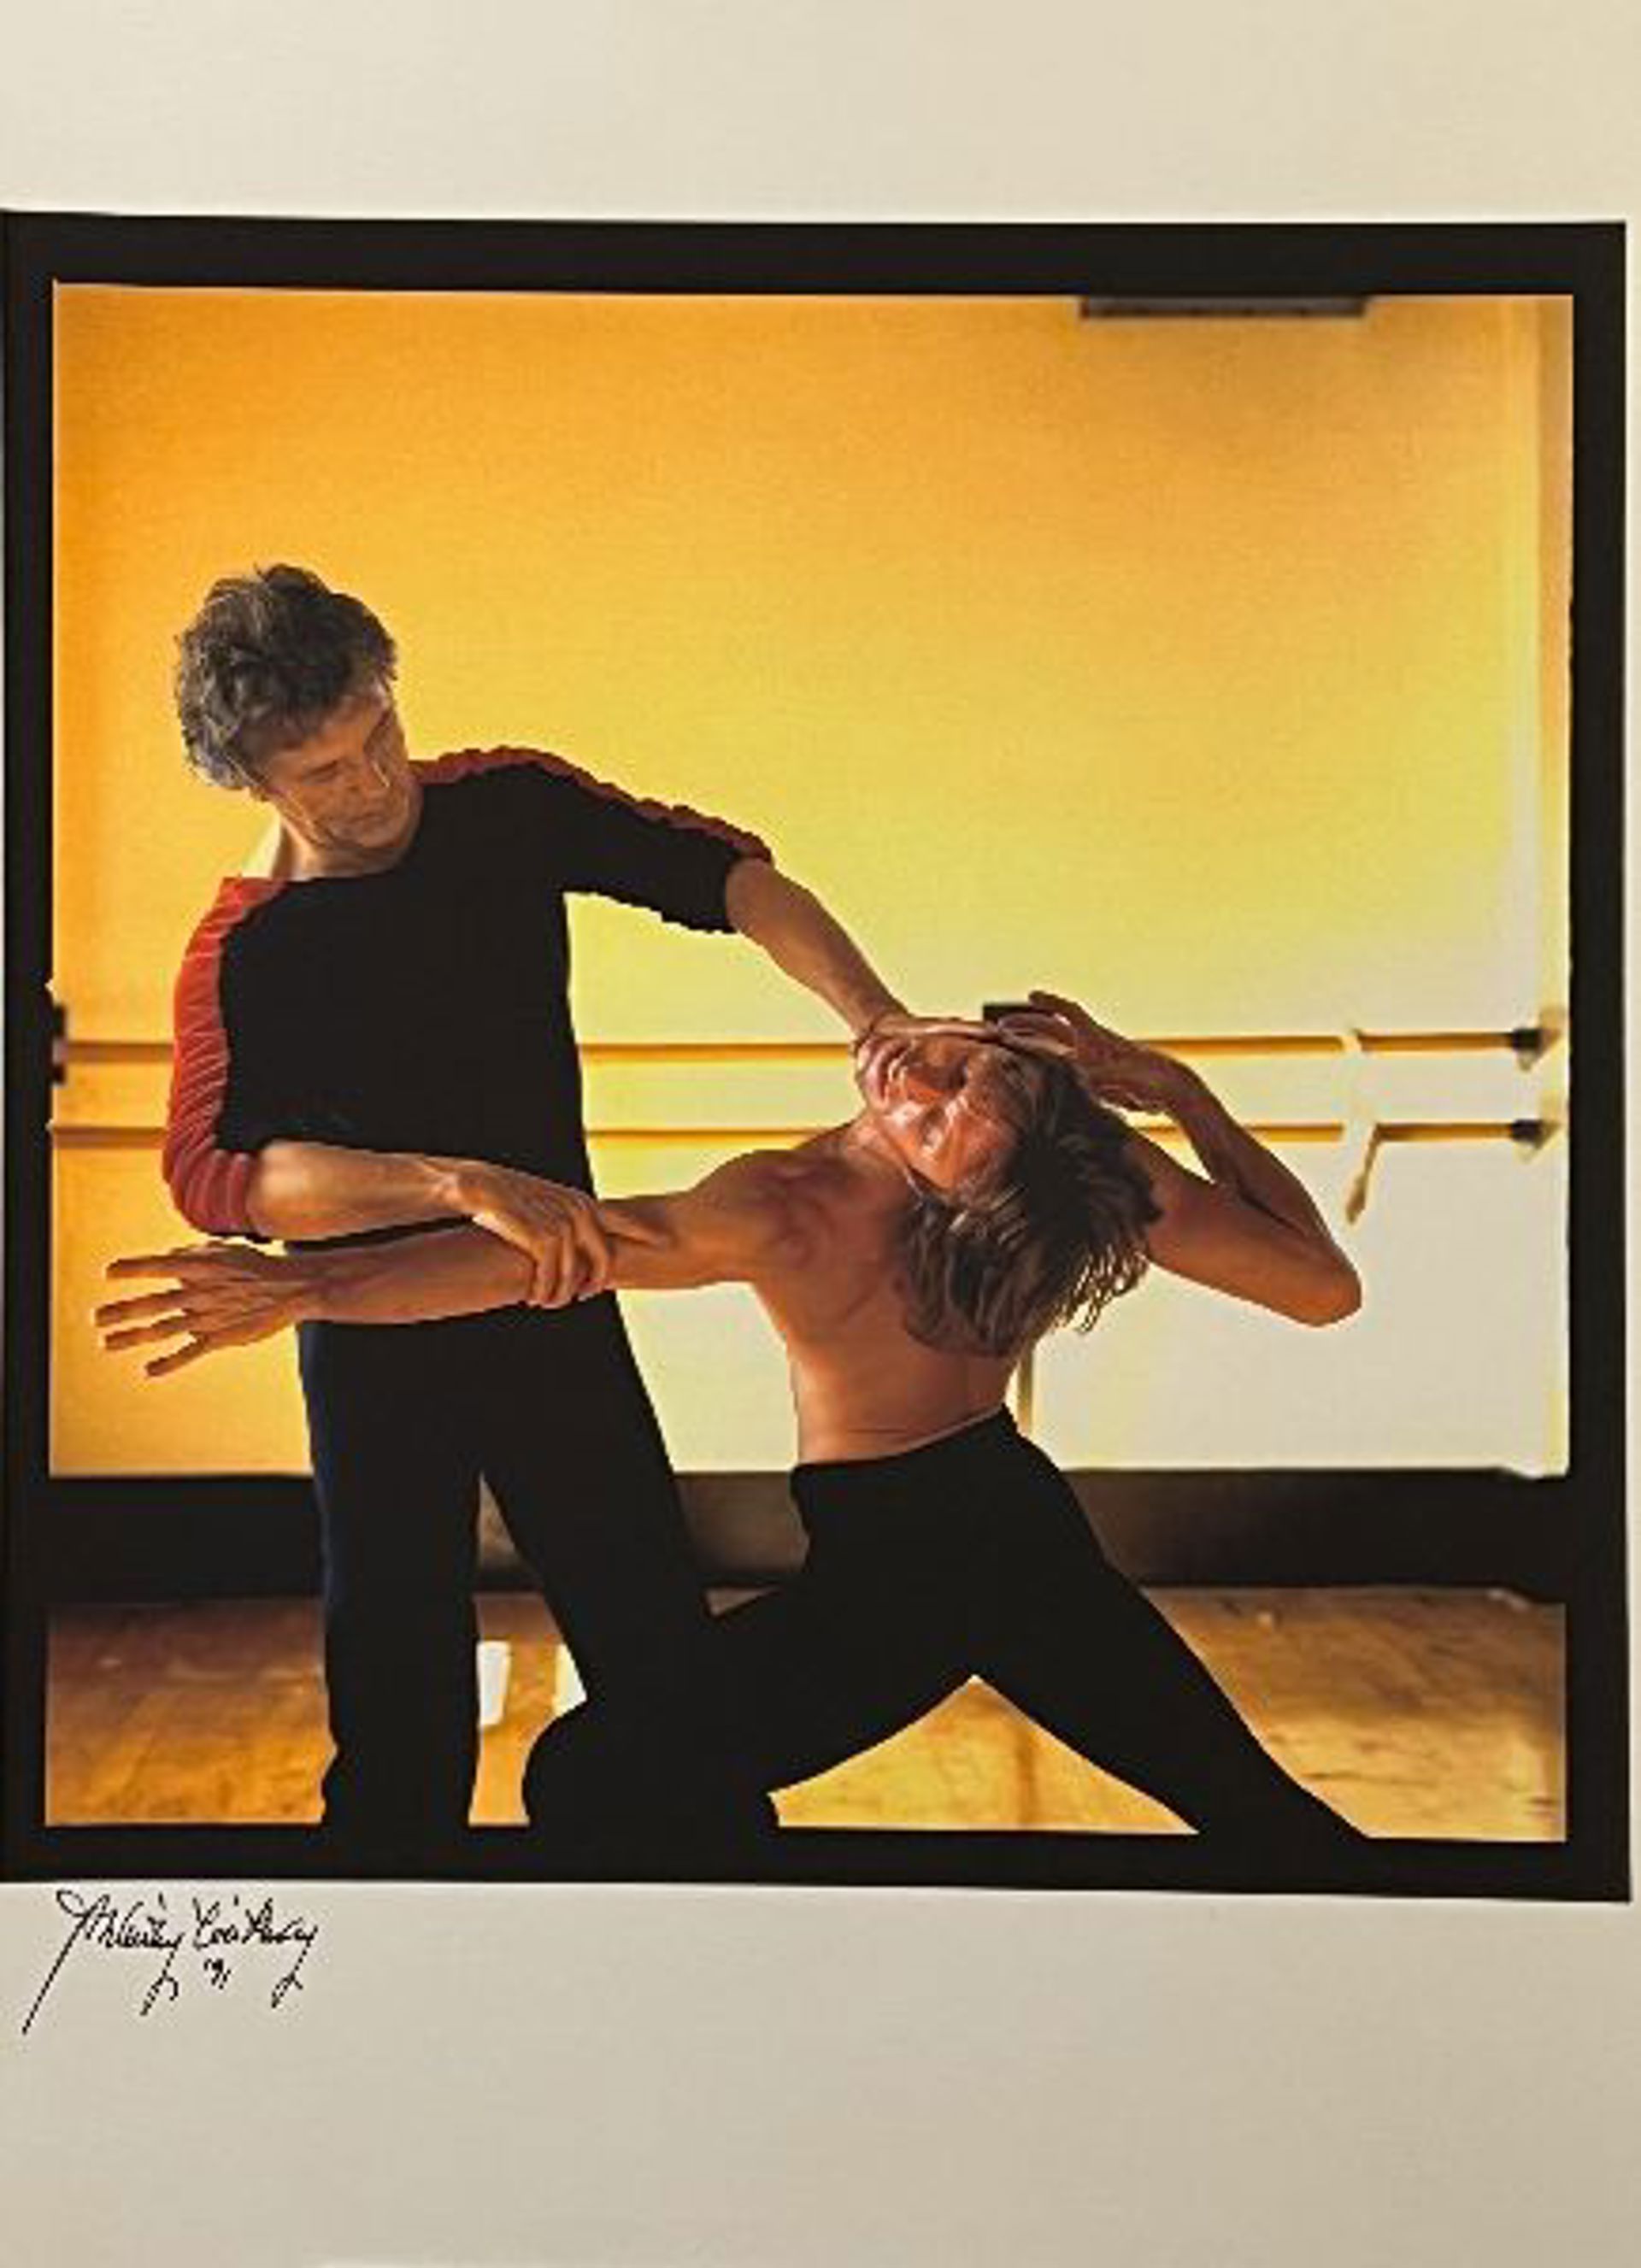 male dance teacher holding male dancers arm and head in movement in front of ballet bar in an orange lit dance studio